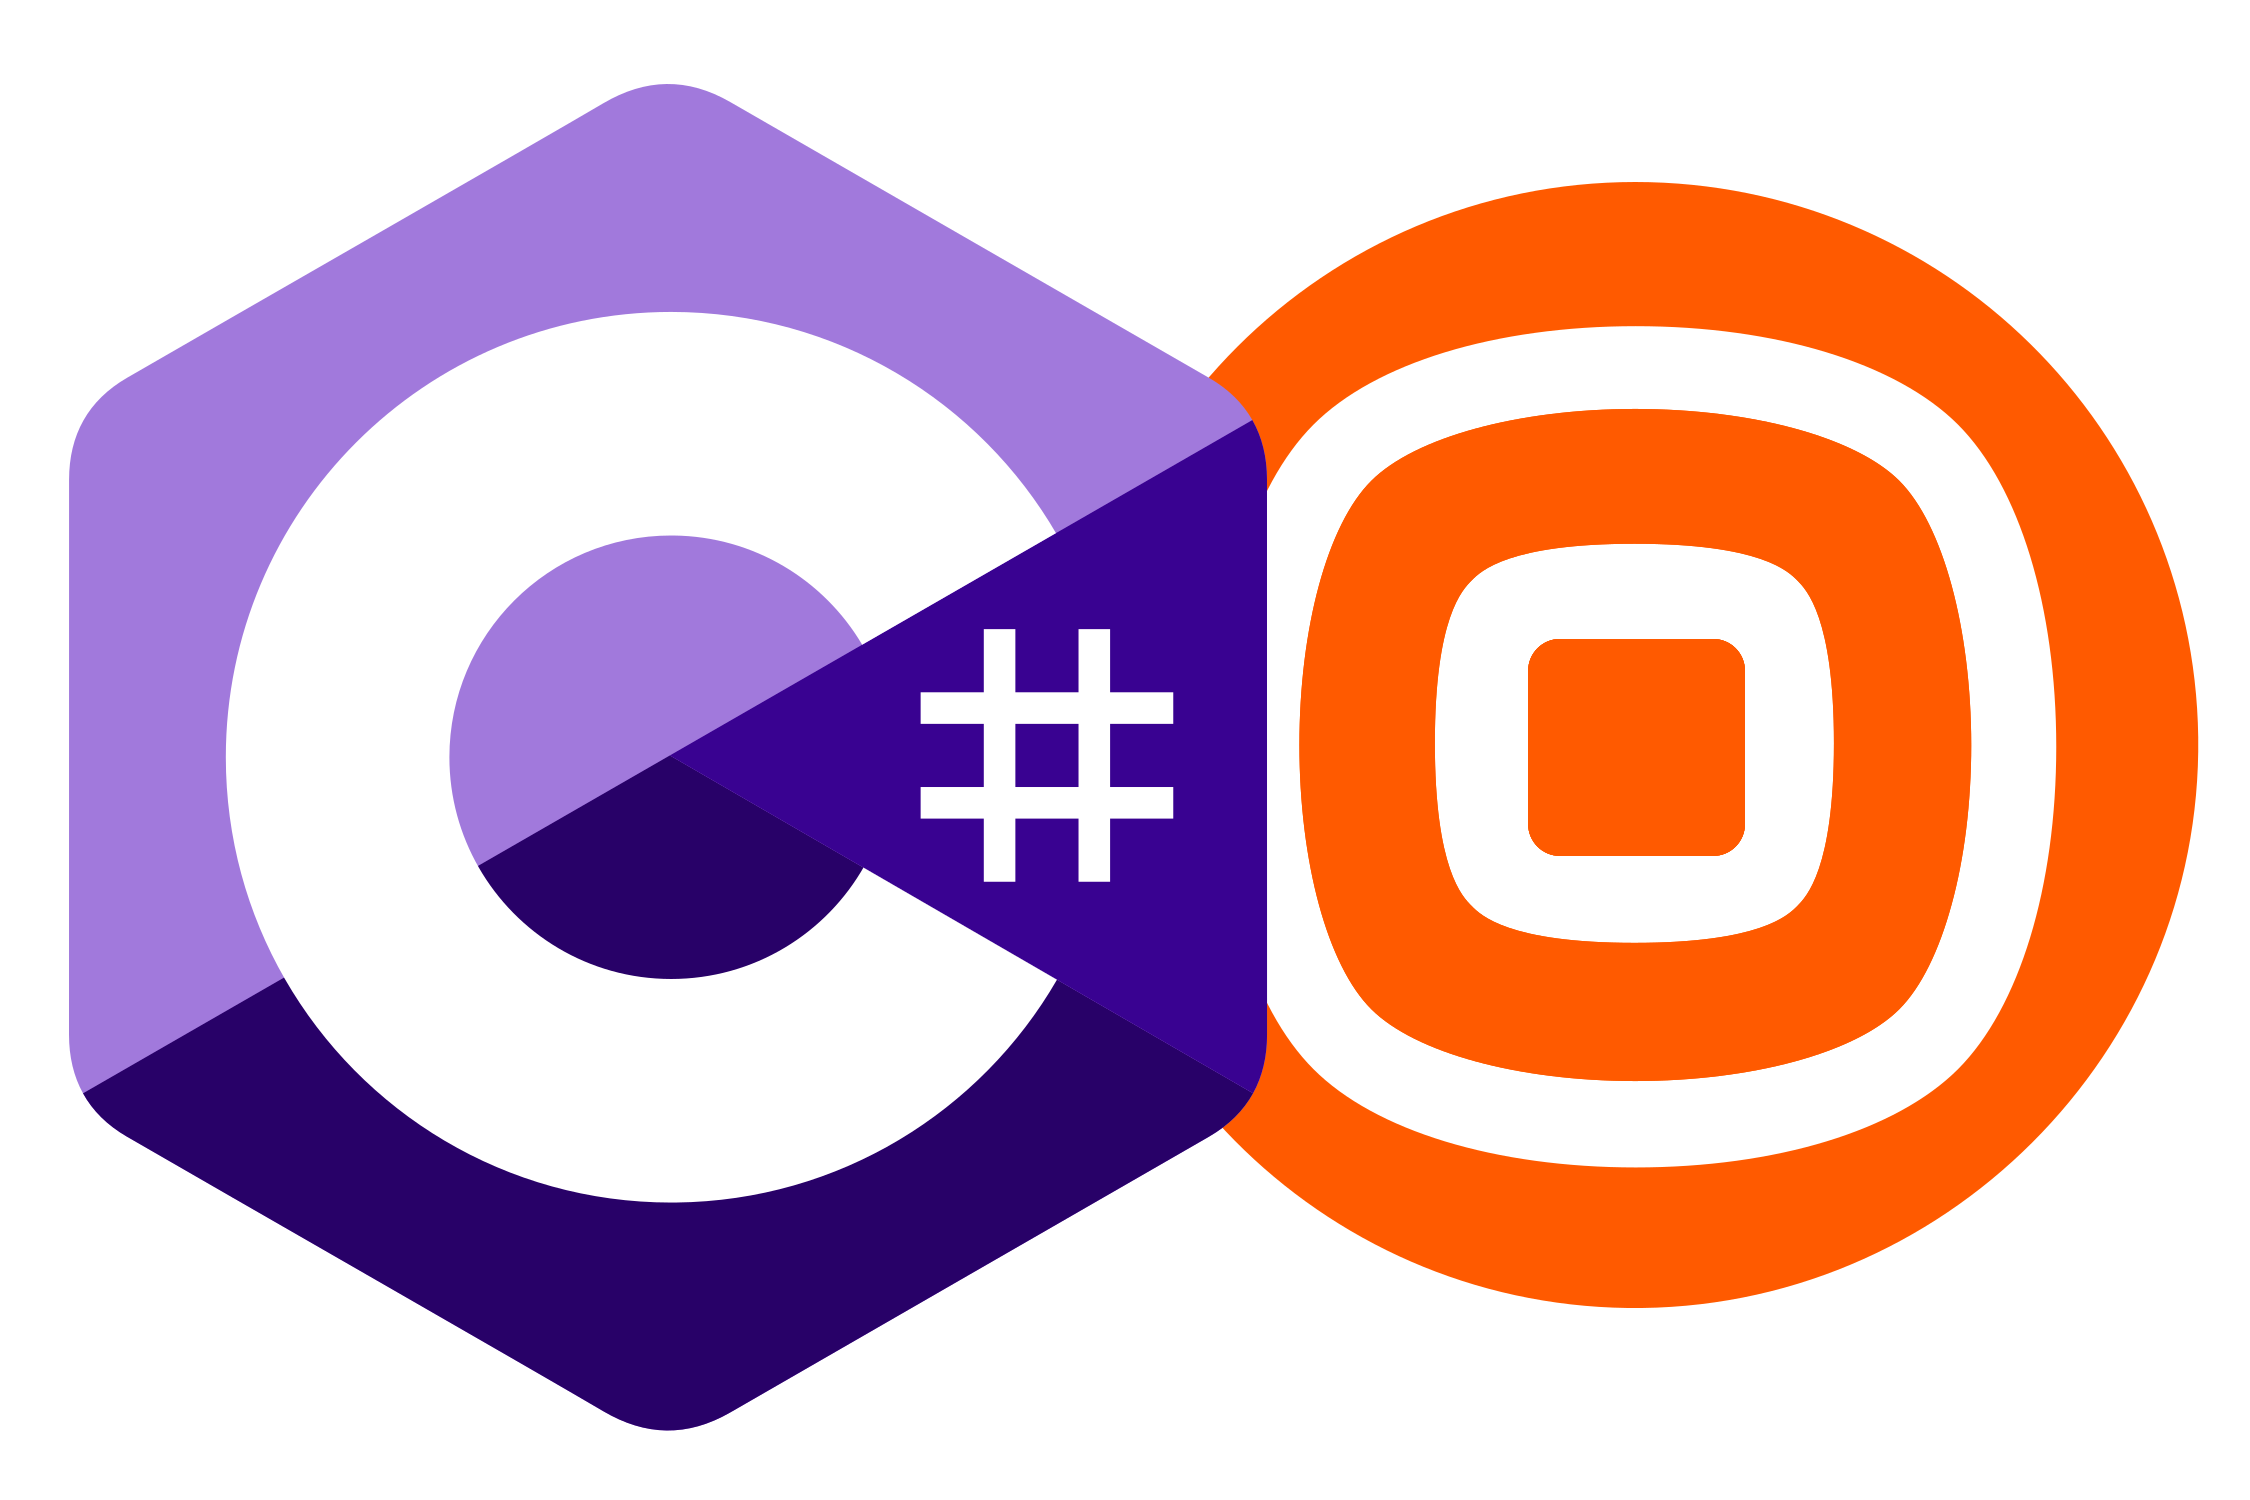 A banner image showing the C# and Infobip logos side by side.